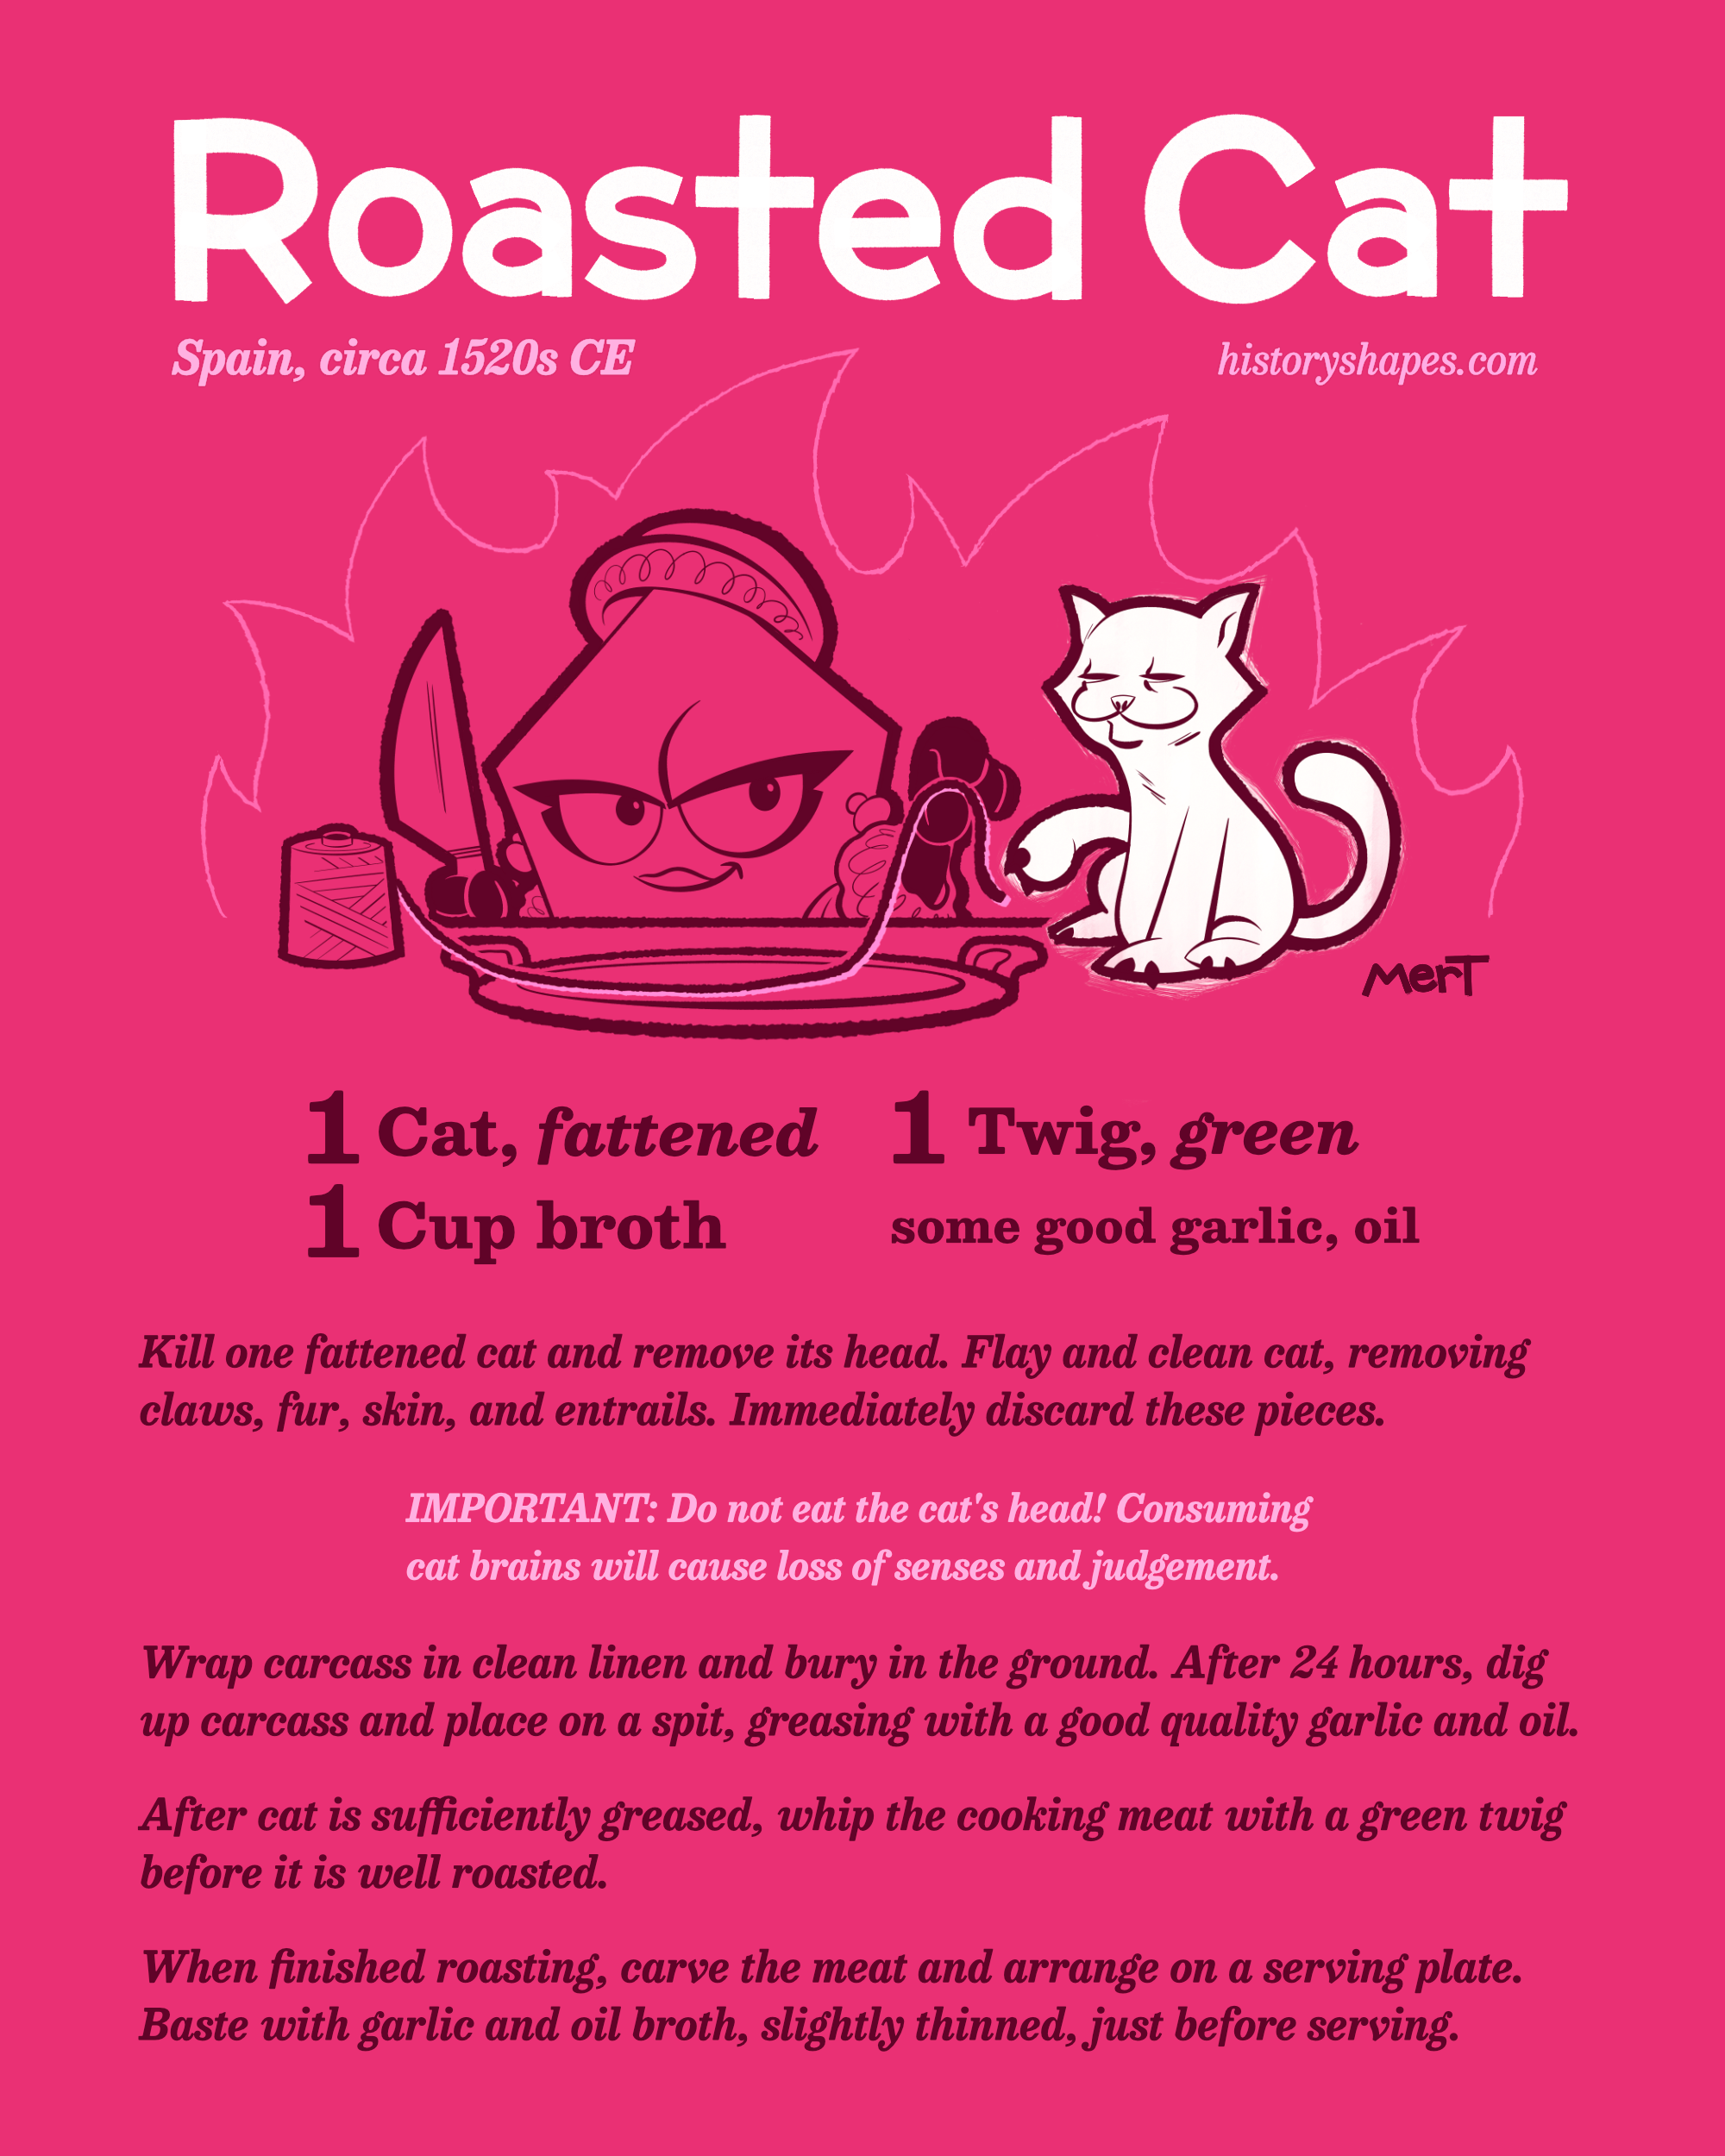 Mel, a pink pentagon, dangles butcher's twine to lure a cat while she holds a knife in her other hand. The recipe for Roasted Cat follows.